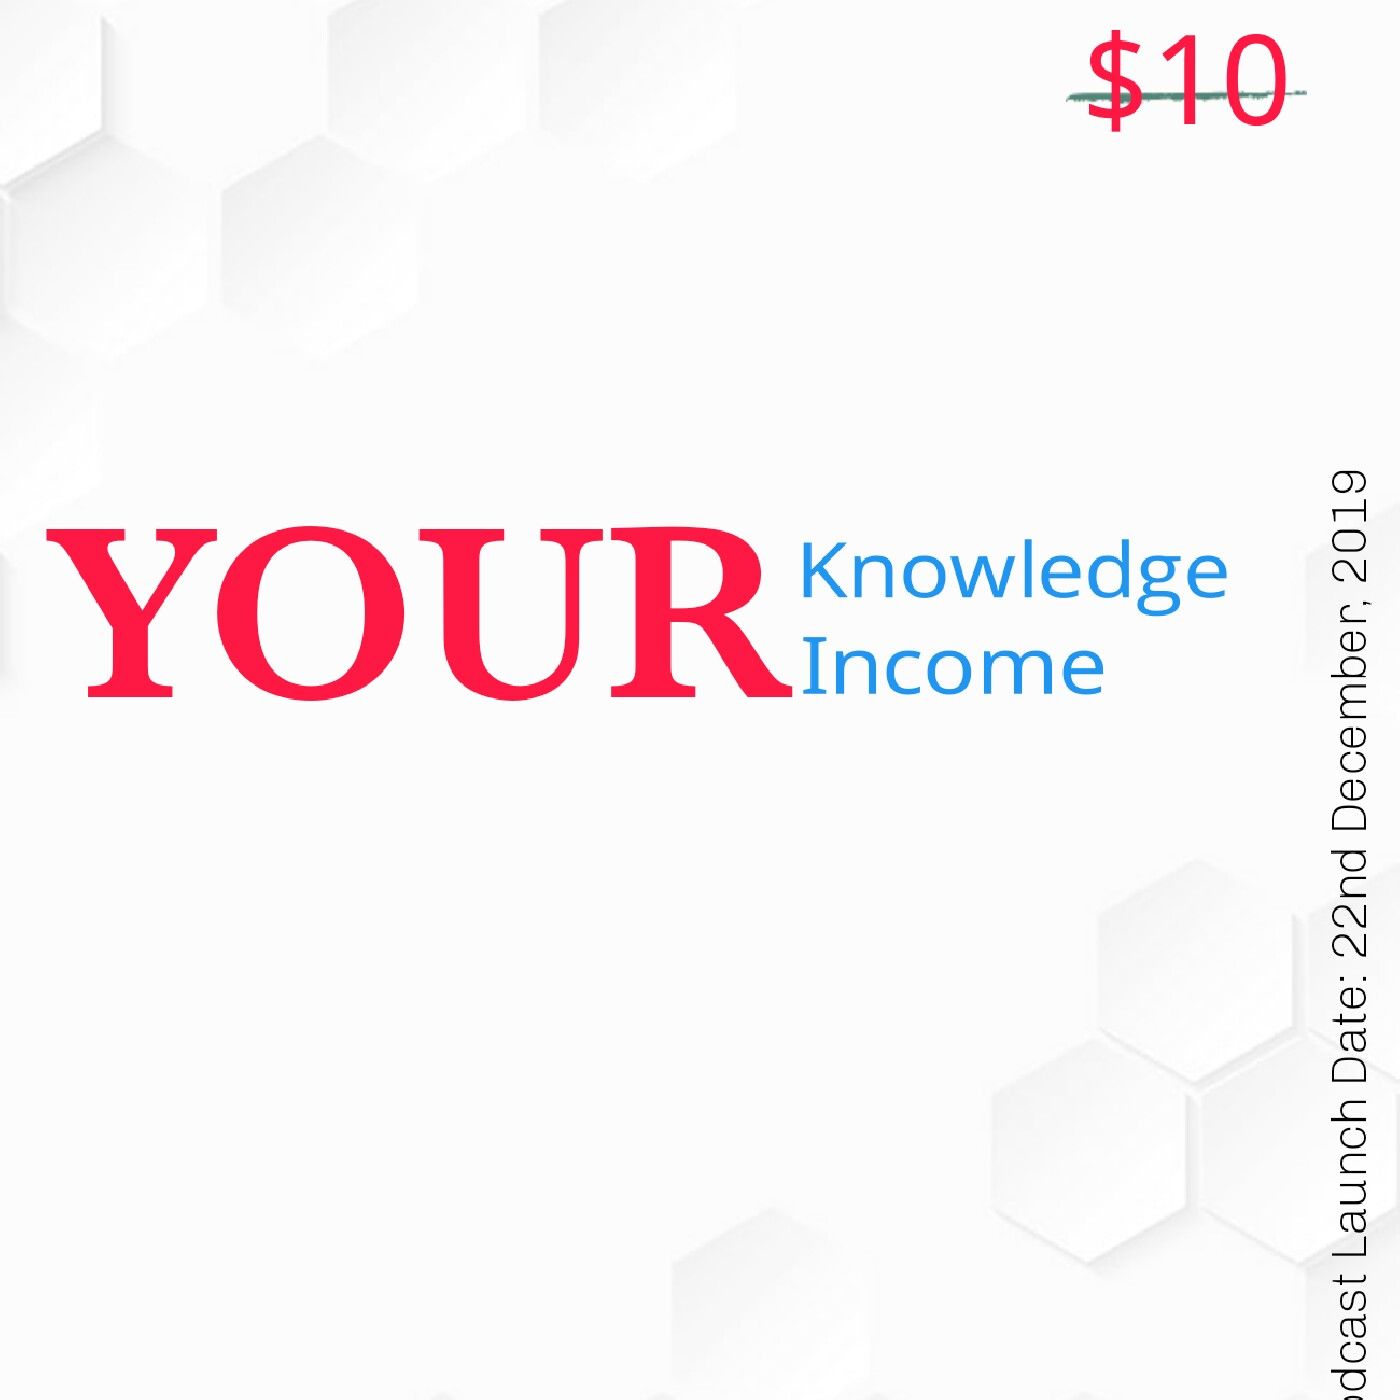 Episode 5 (Part 2) - Your Knowledge, Your Income